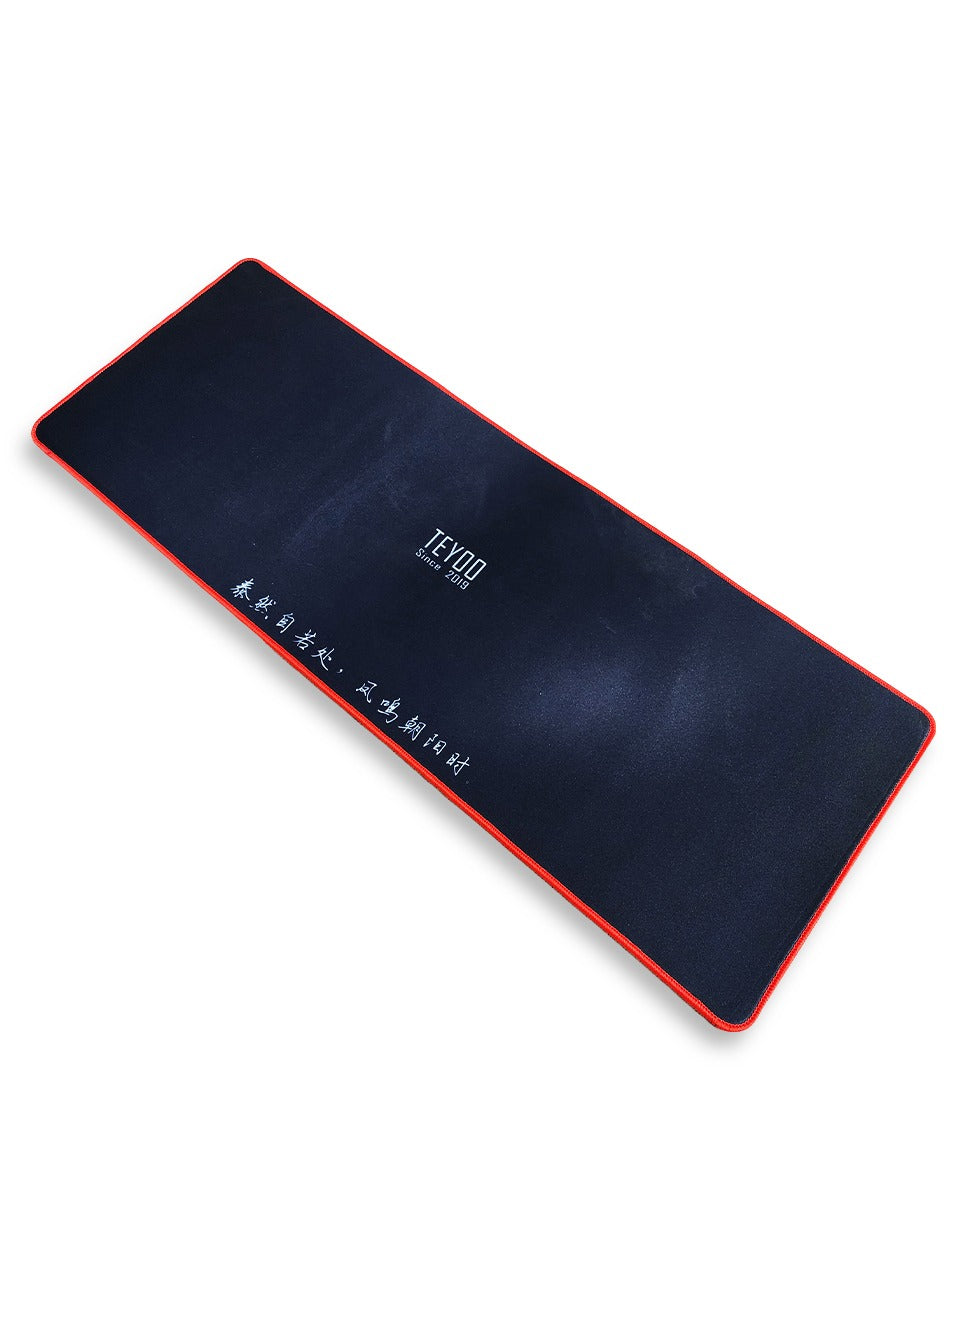 Gaming Mouse Pad -Colour Designs- Size 80X30 CM - Stitched Edges Anti-slip rubber base - Optimized for all mouse sensitivities and sensors